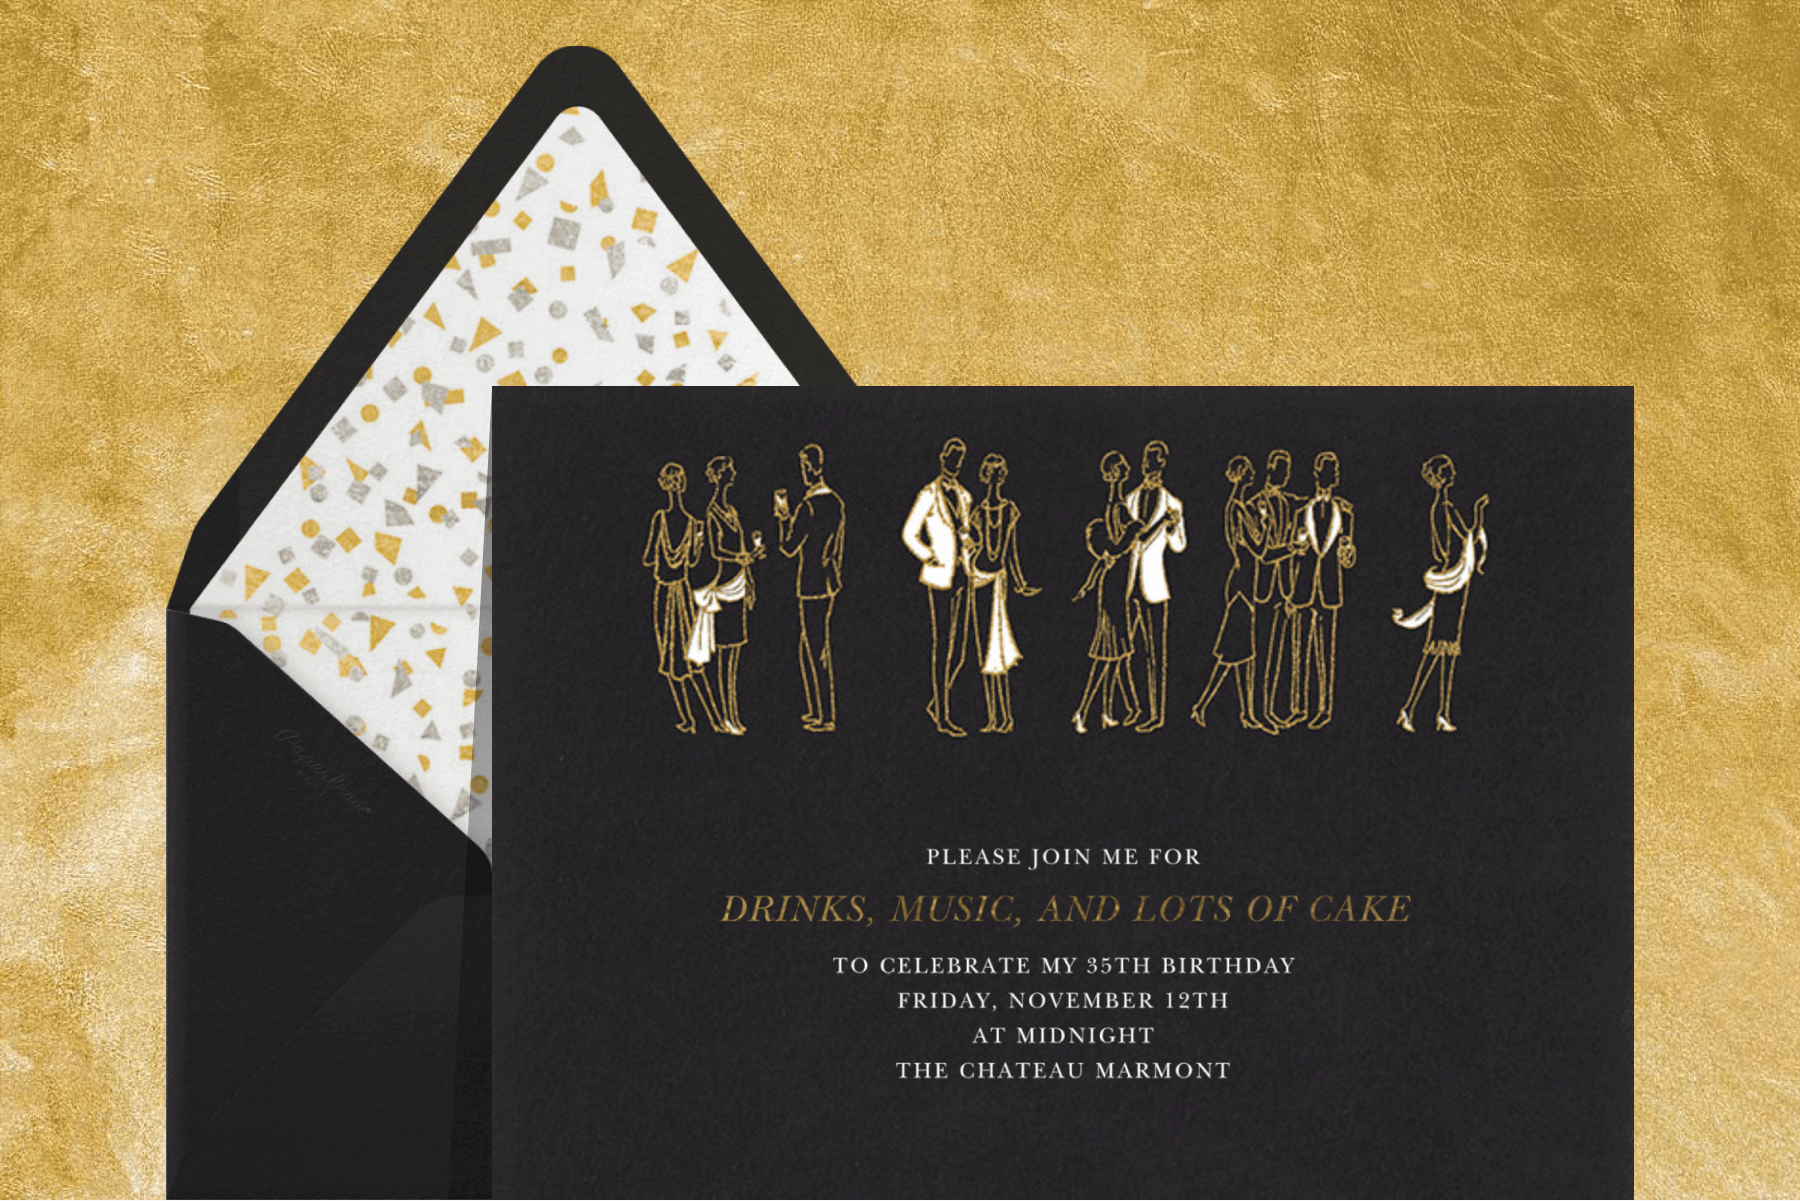 A black invitation with small gold sketches of party-goers wearing 1920s attire.